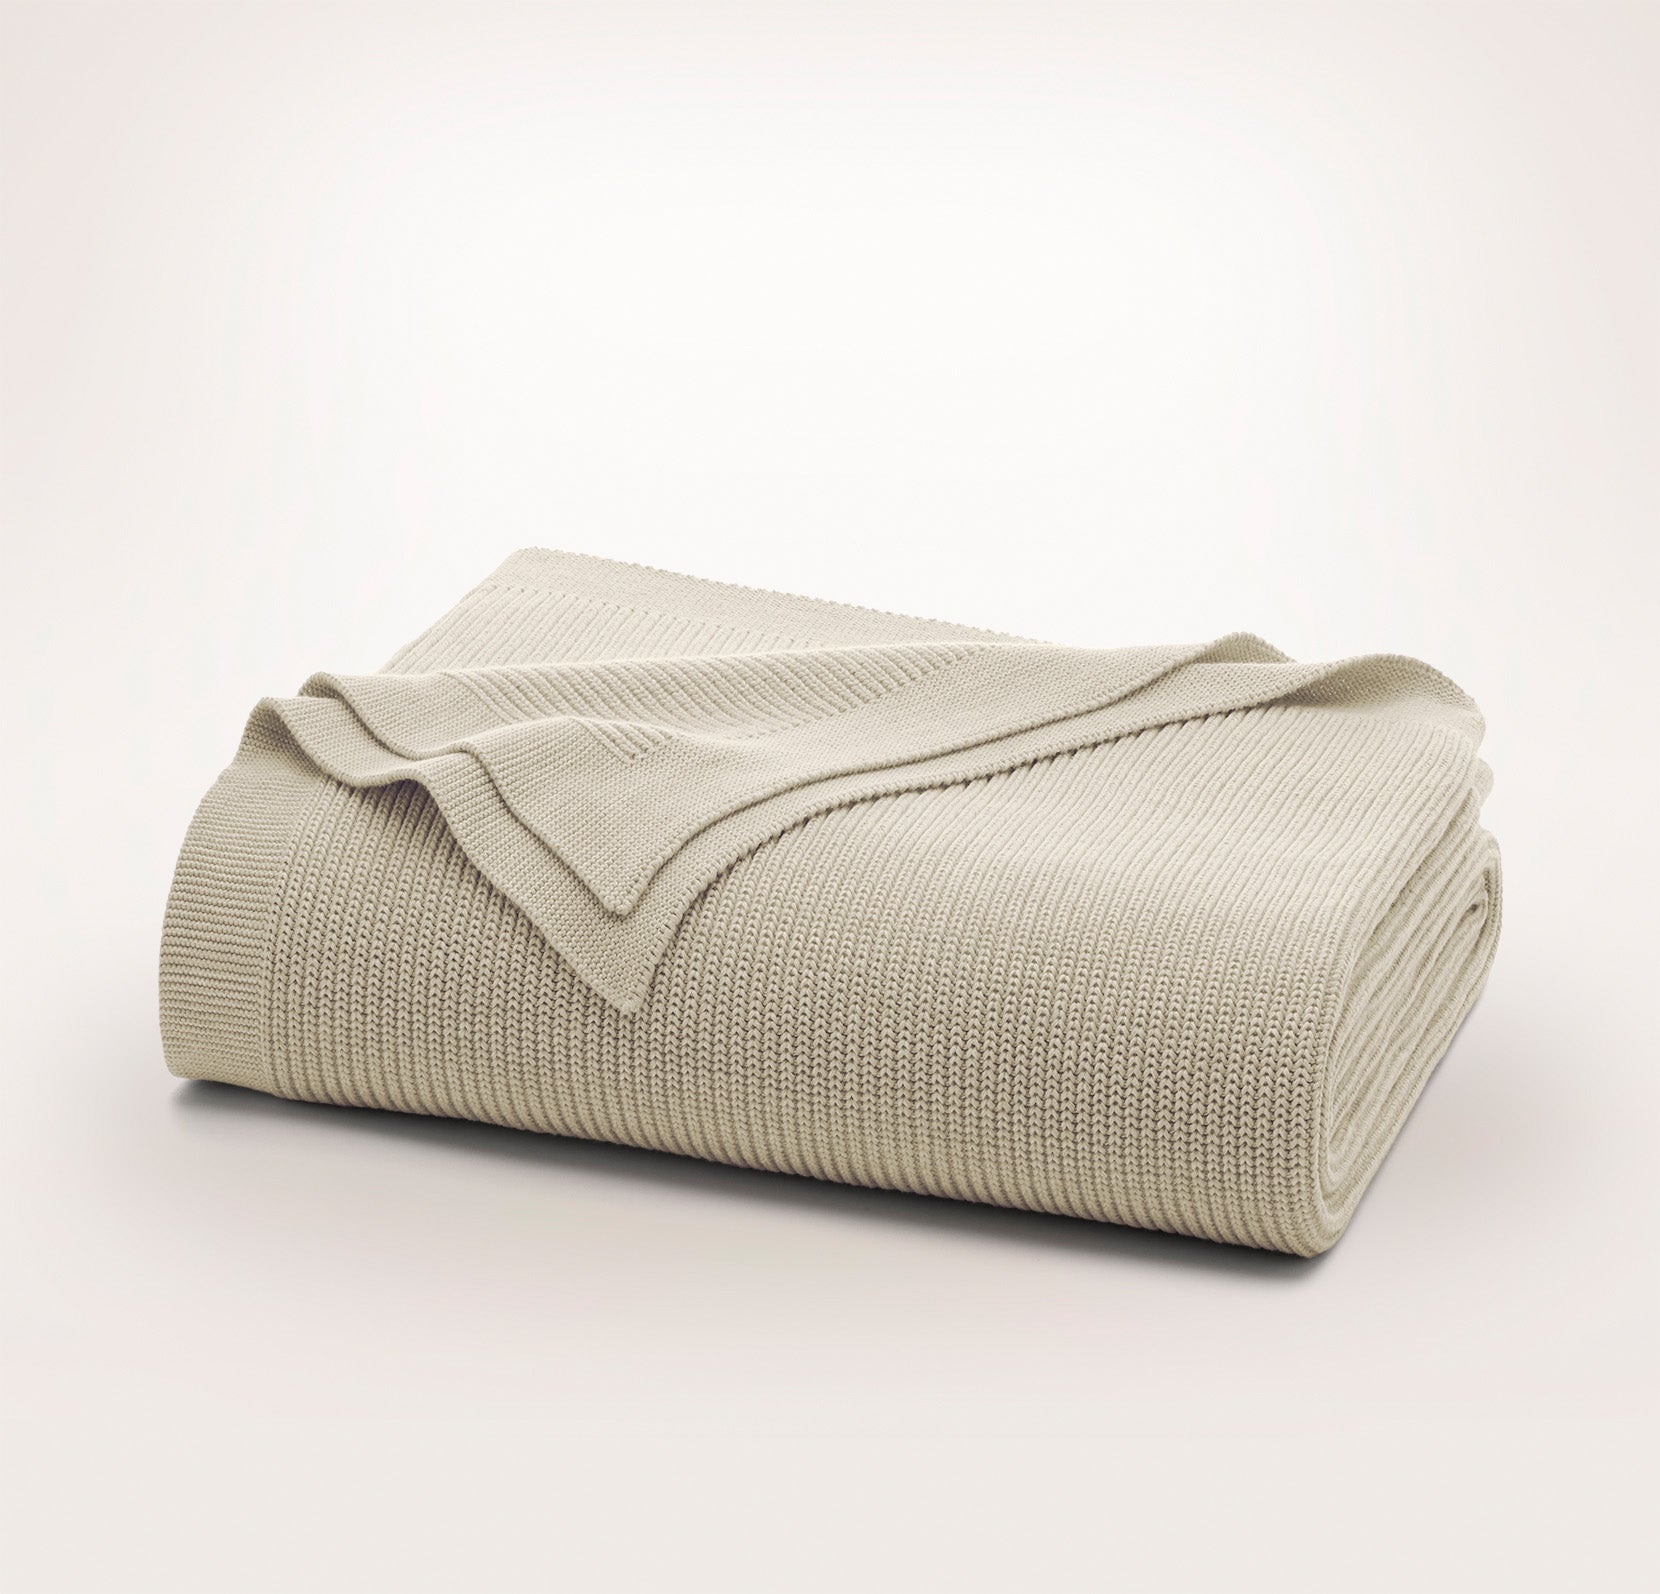 Ribbed Knit Bed Blanket in Heathered Oatmeal